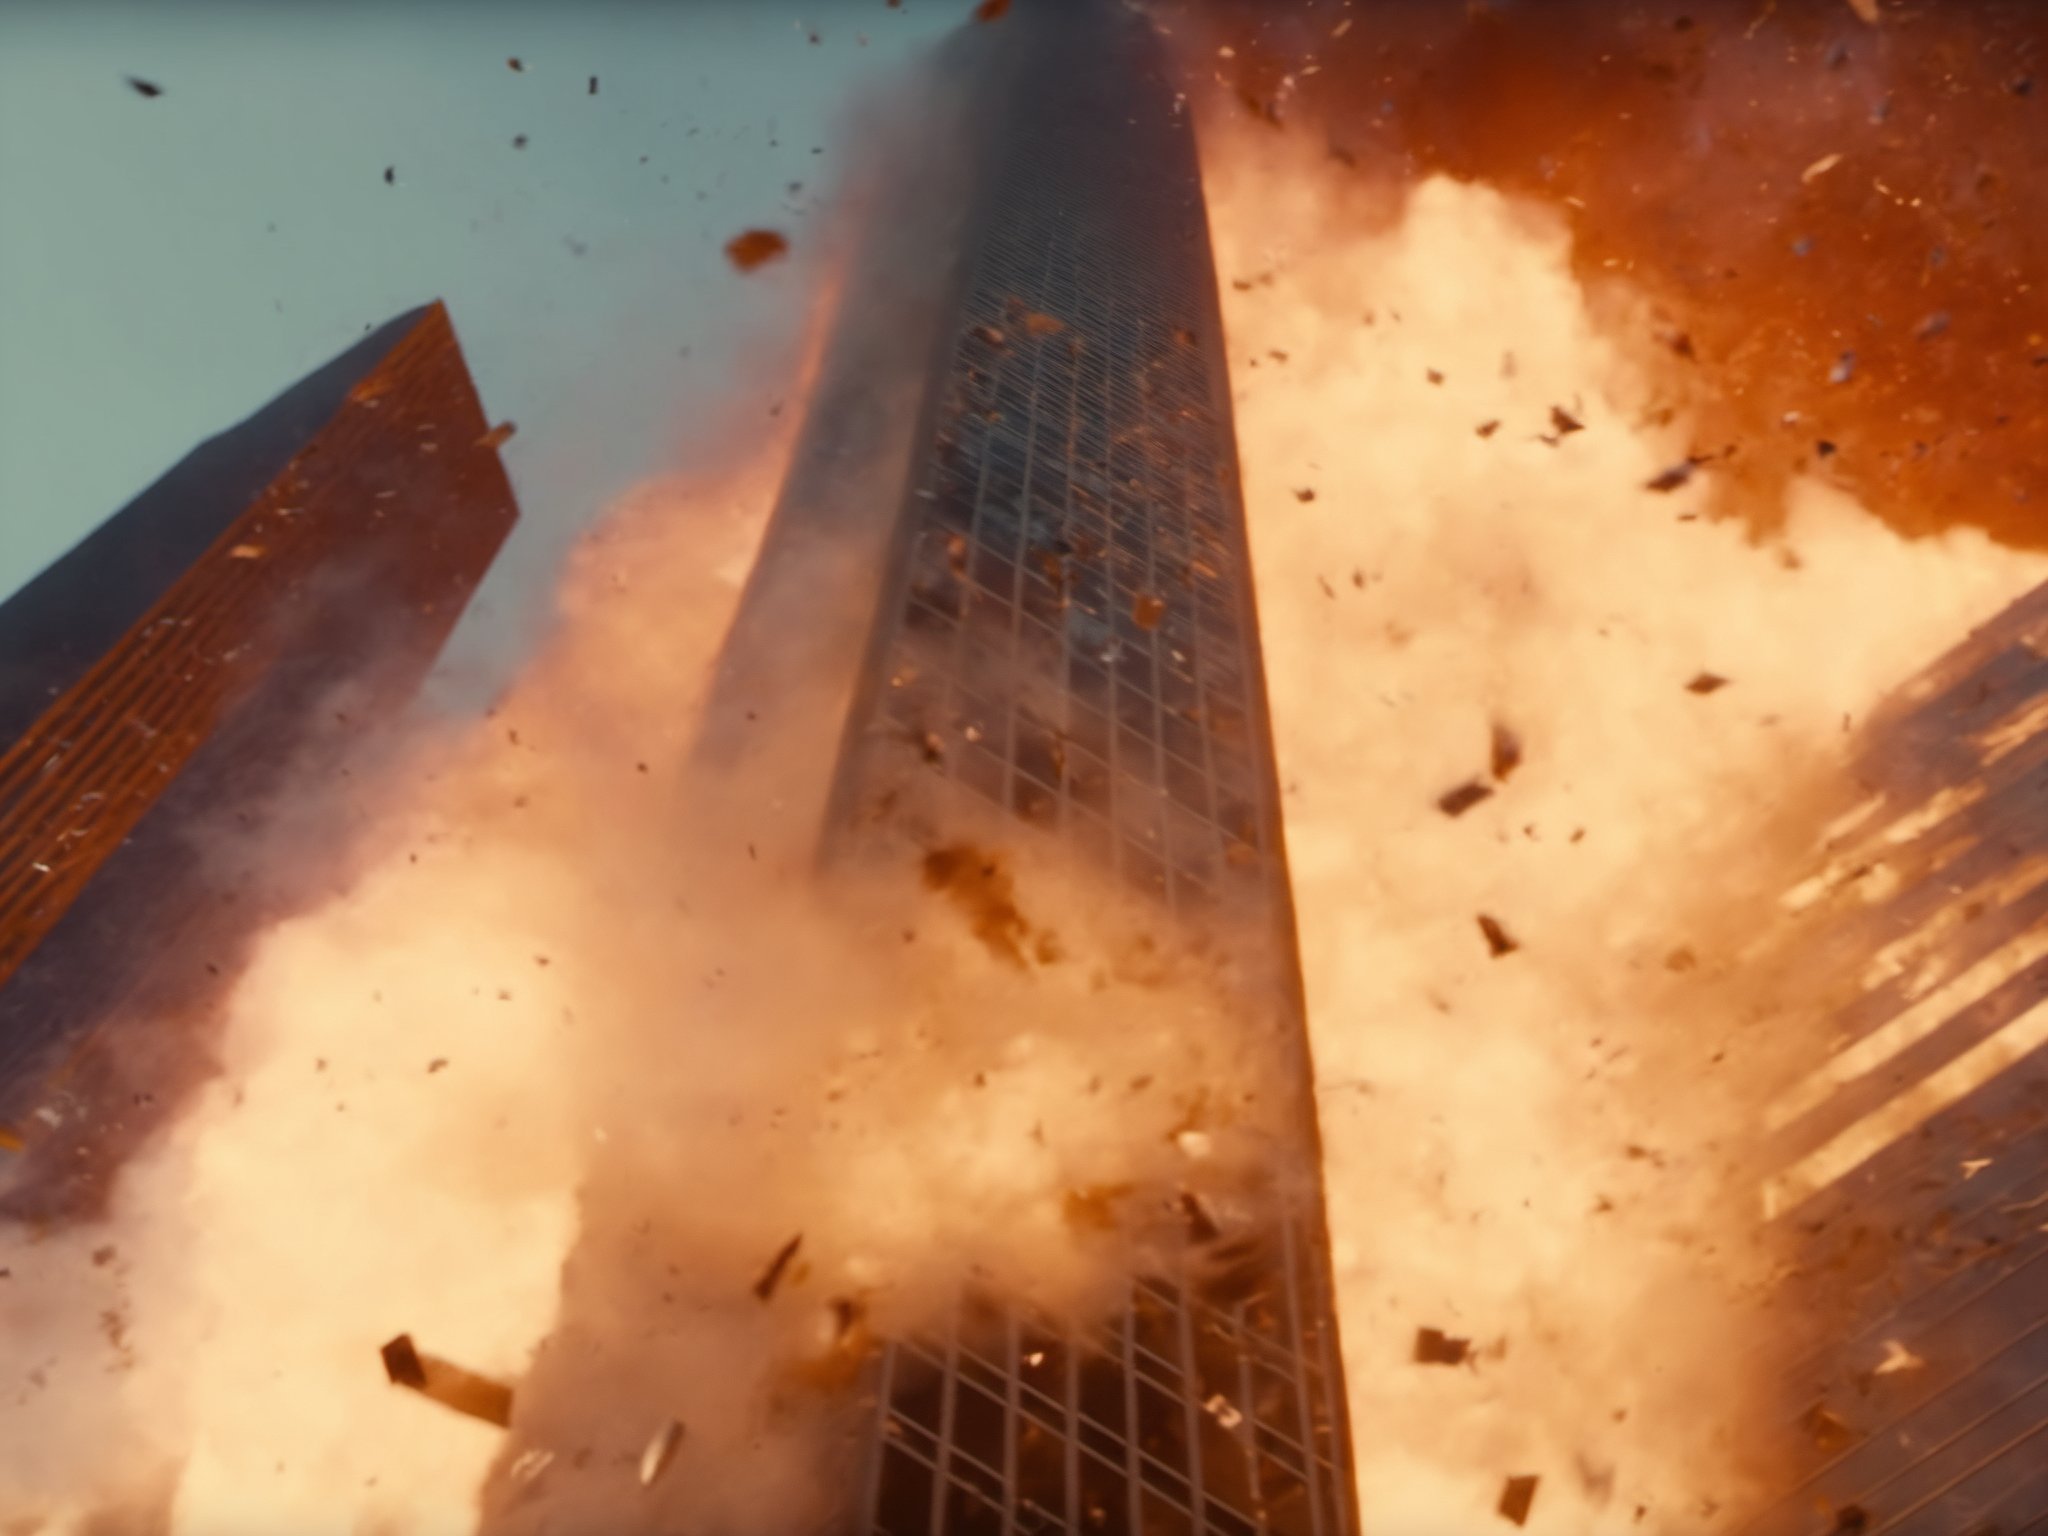 (m0vieexpl0sipn), film still of a skyscraper, down up view, down up angle, (explosion:0.7), flying debris, best picture, best quality, UHD, oscar winner